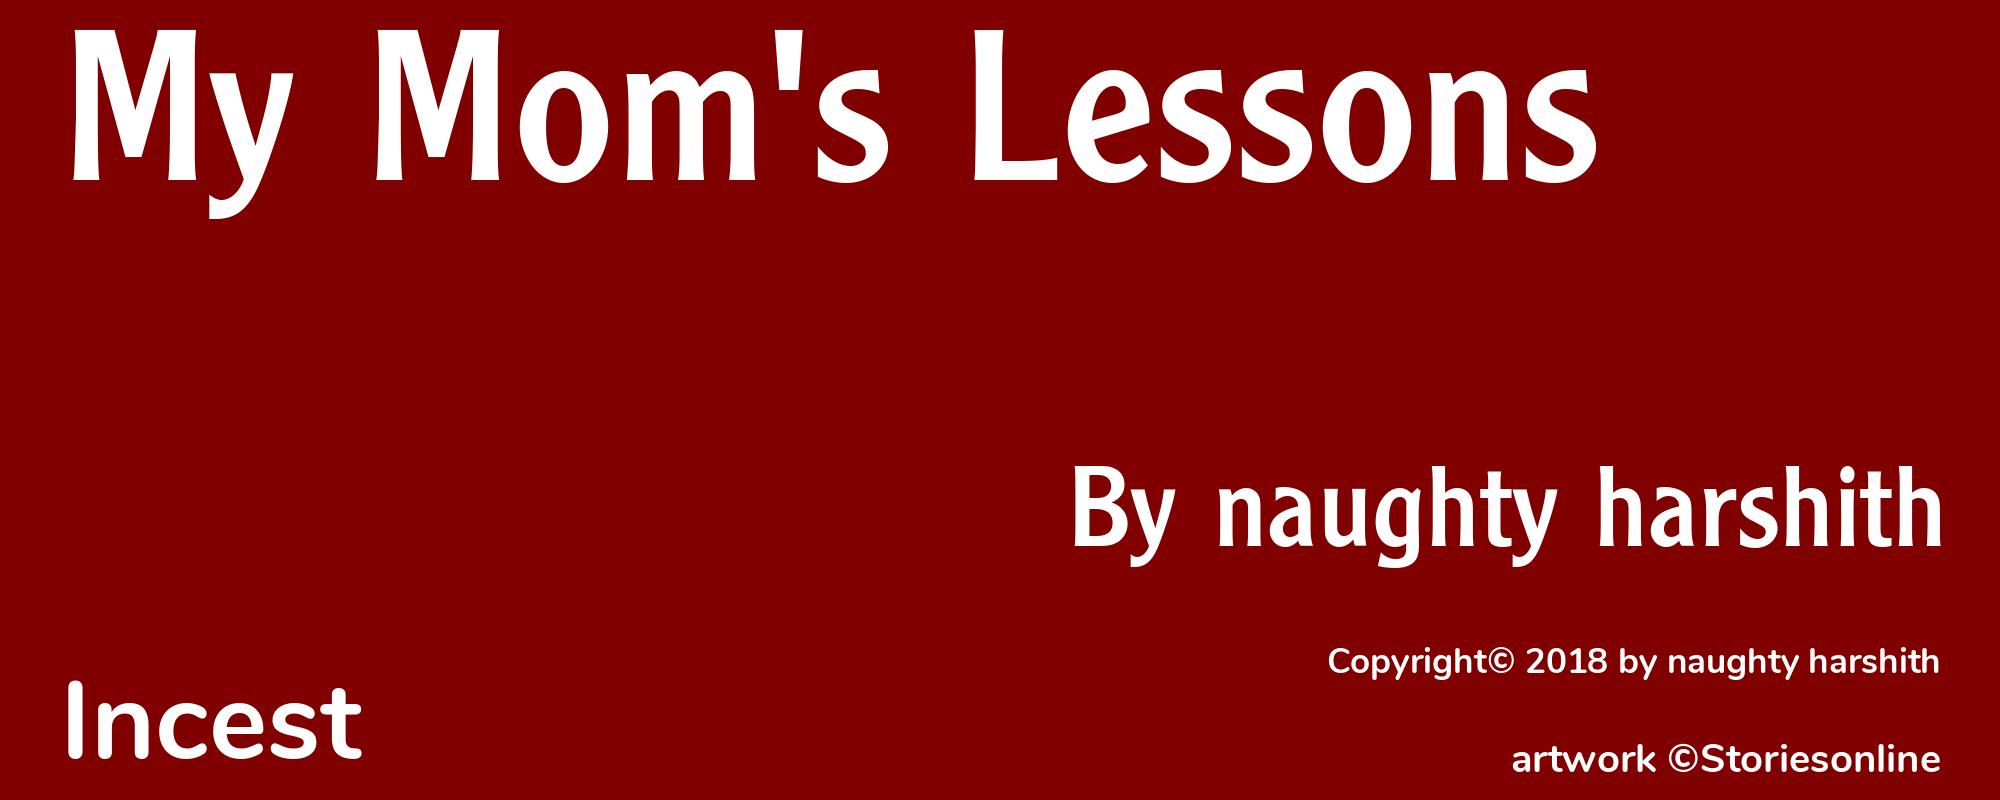 My Mom's Lessons - Cover